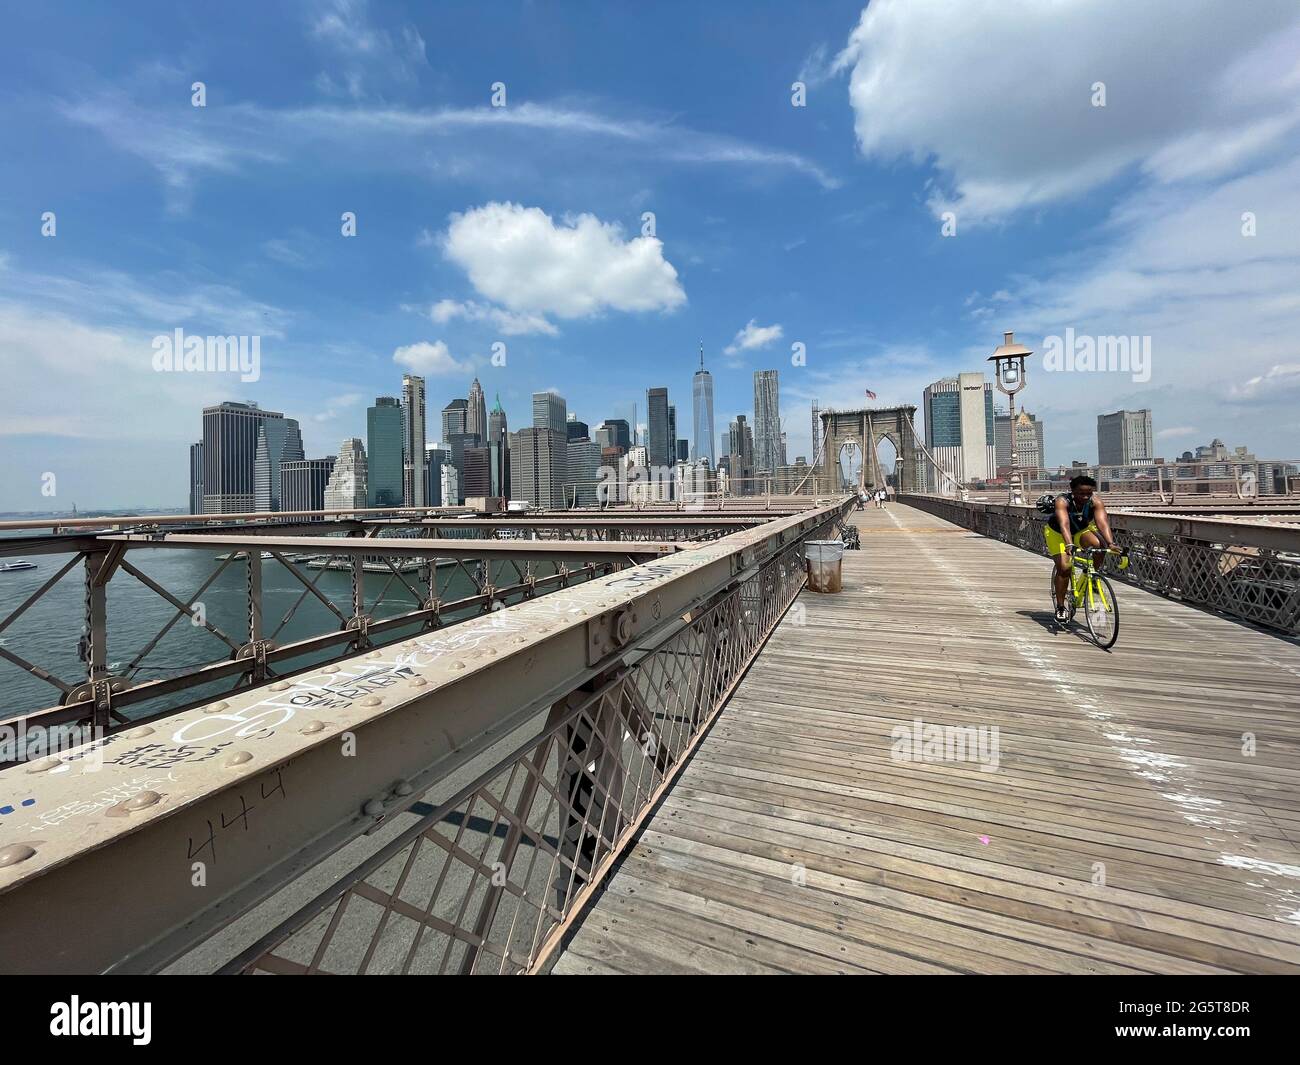 The walkway across the Brooklyn Bridge in New York city has separate lanes for pedestrian walkers and bicyclists. Stock Photo